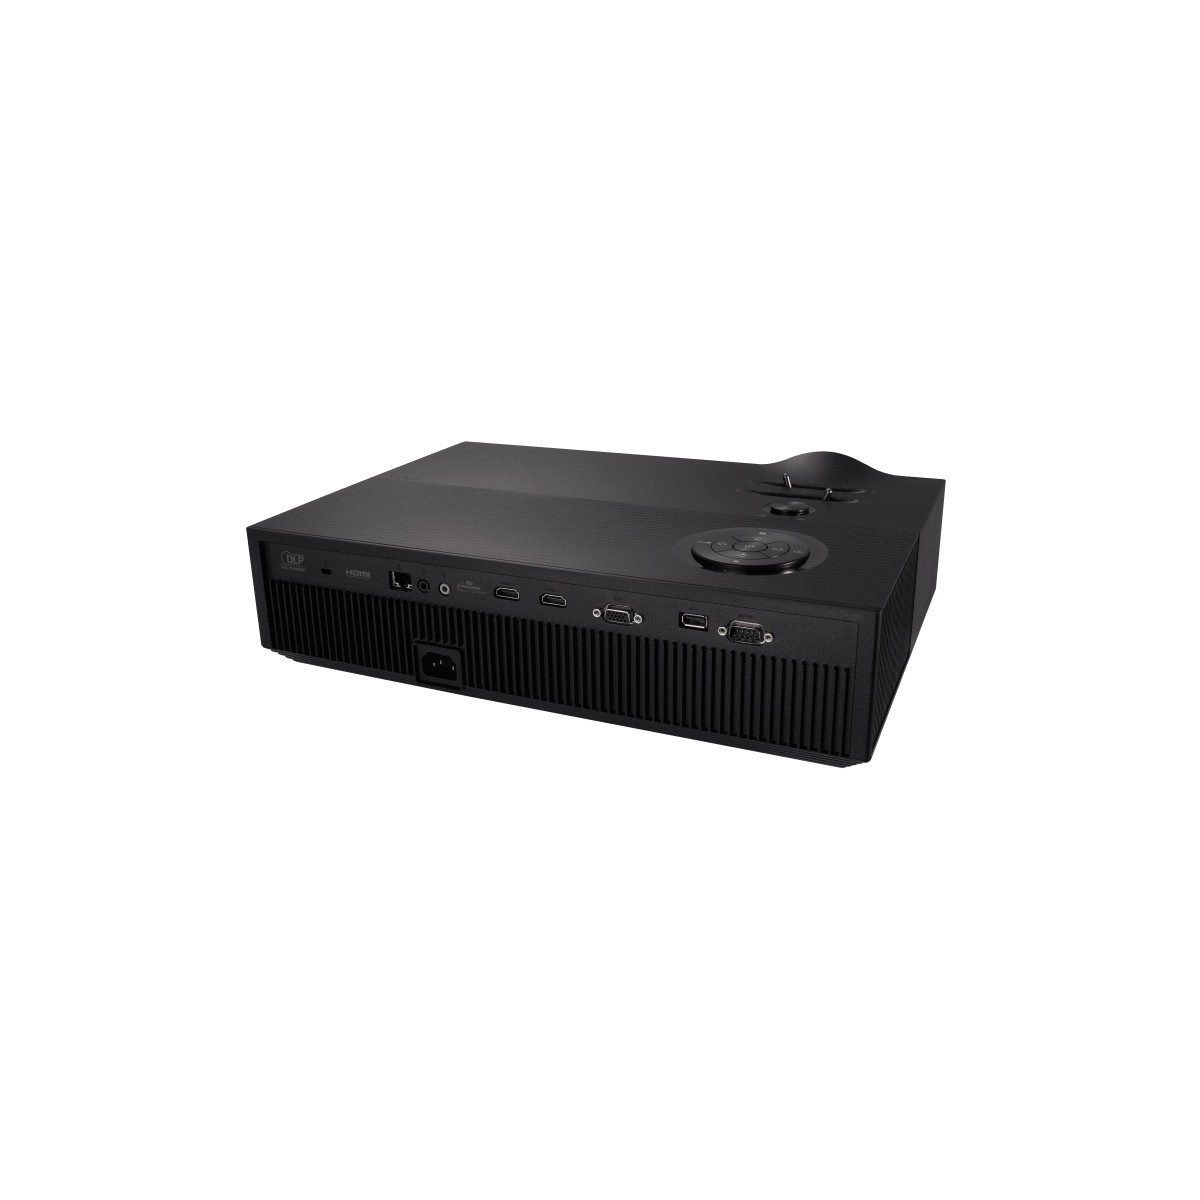 ASUS PROJEKTOR LED H1 1920x1080 DLP 3000 lumens, repro, HDMI, RS-232, RJ45, USB - Crestron Connected certified